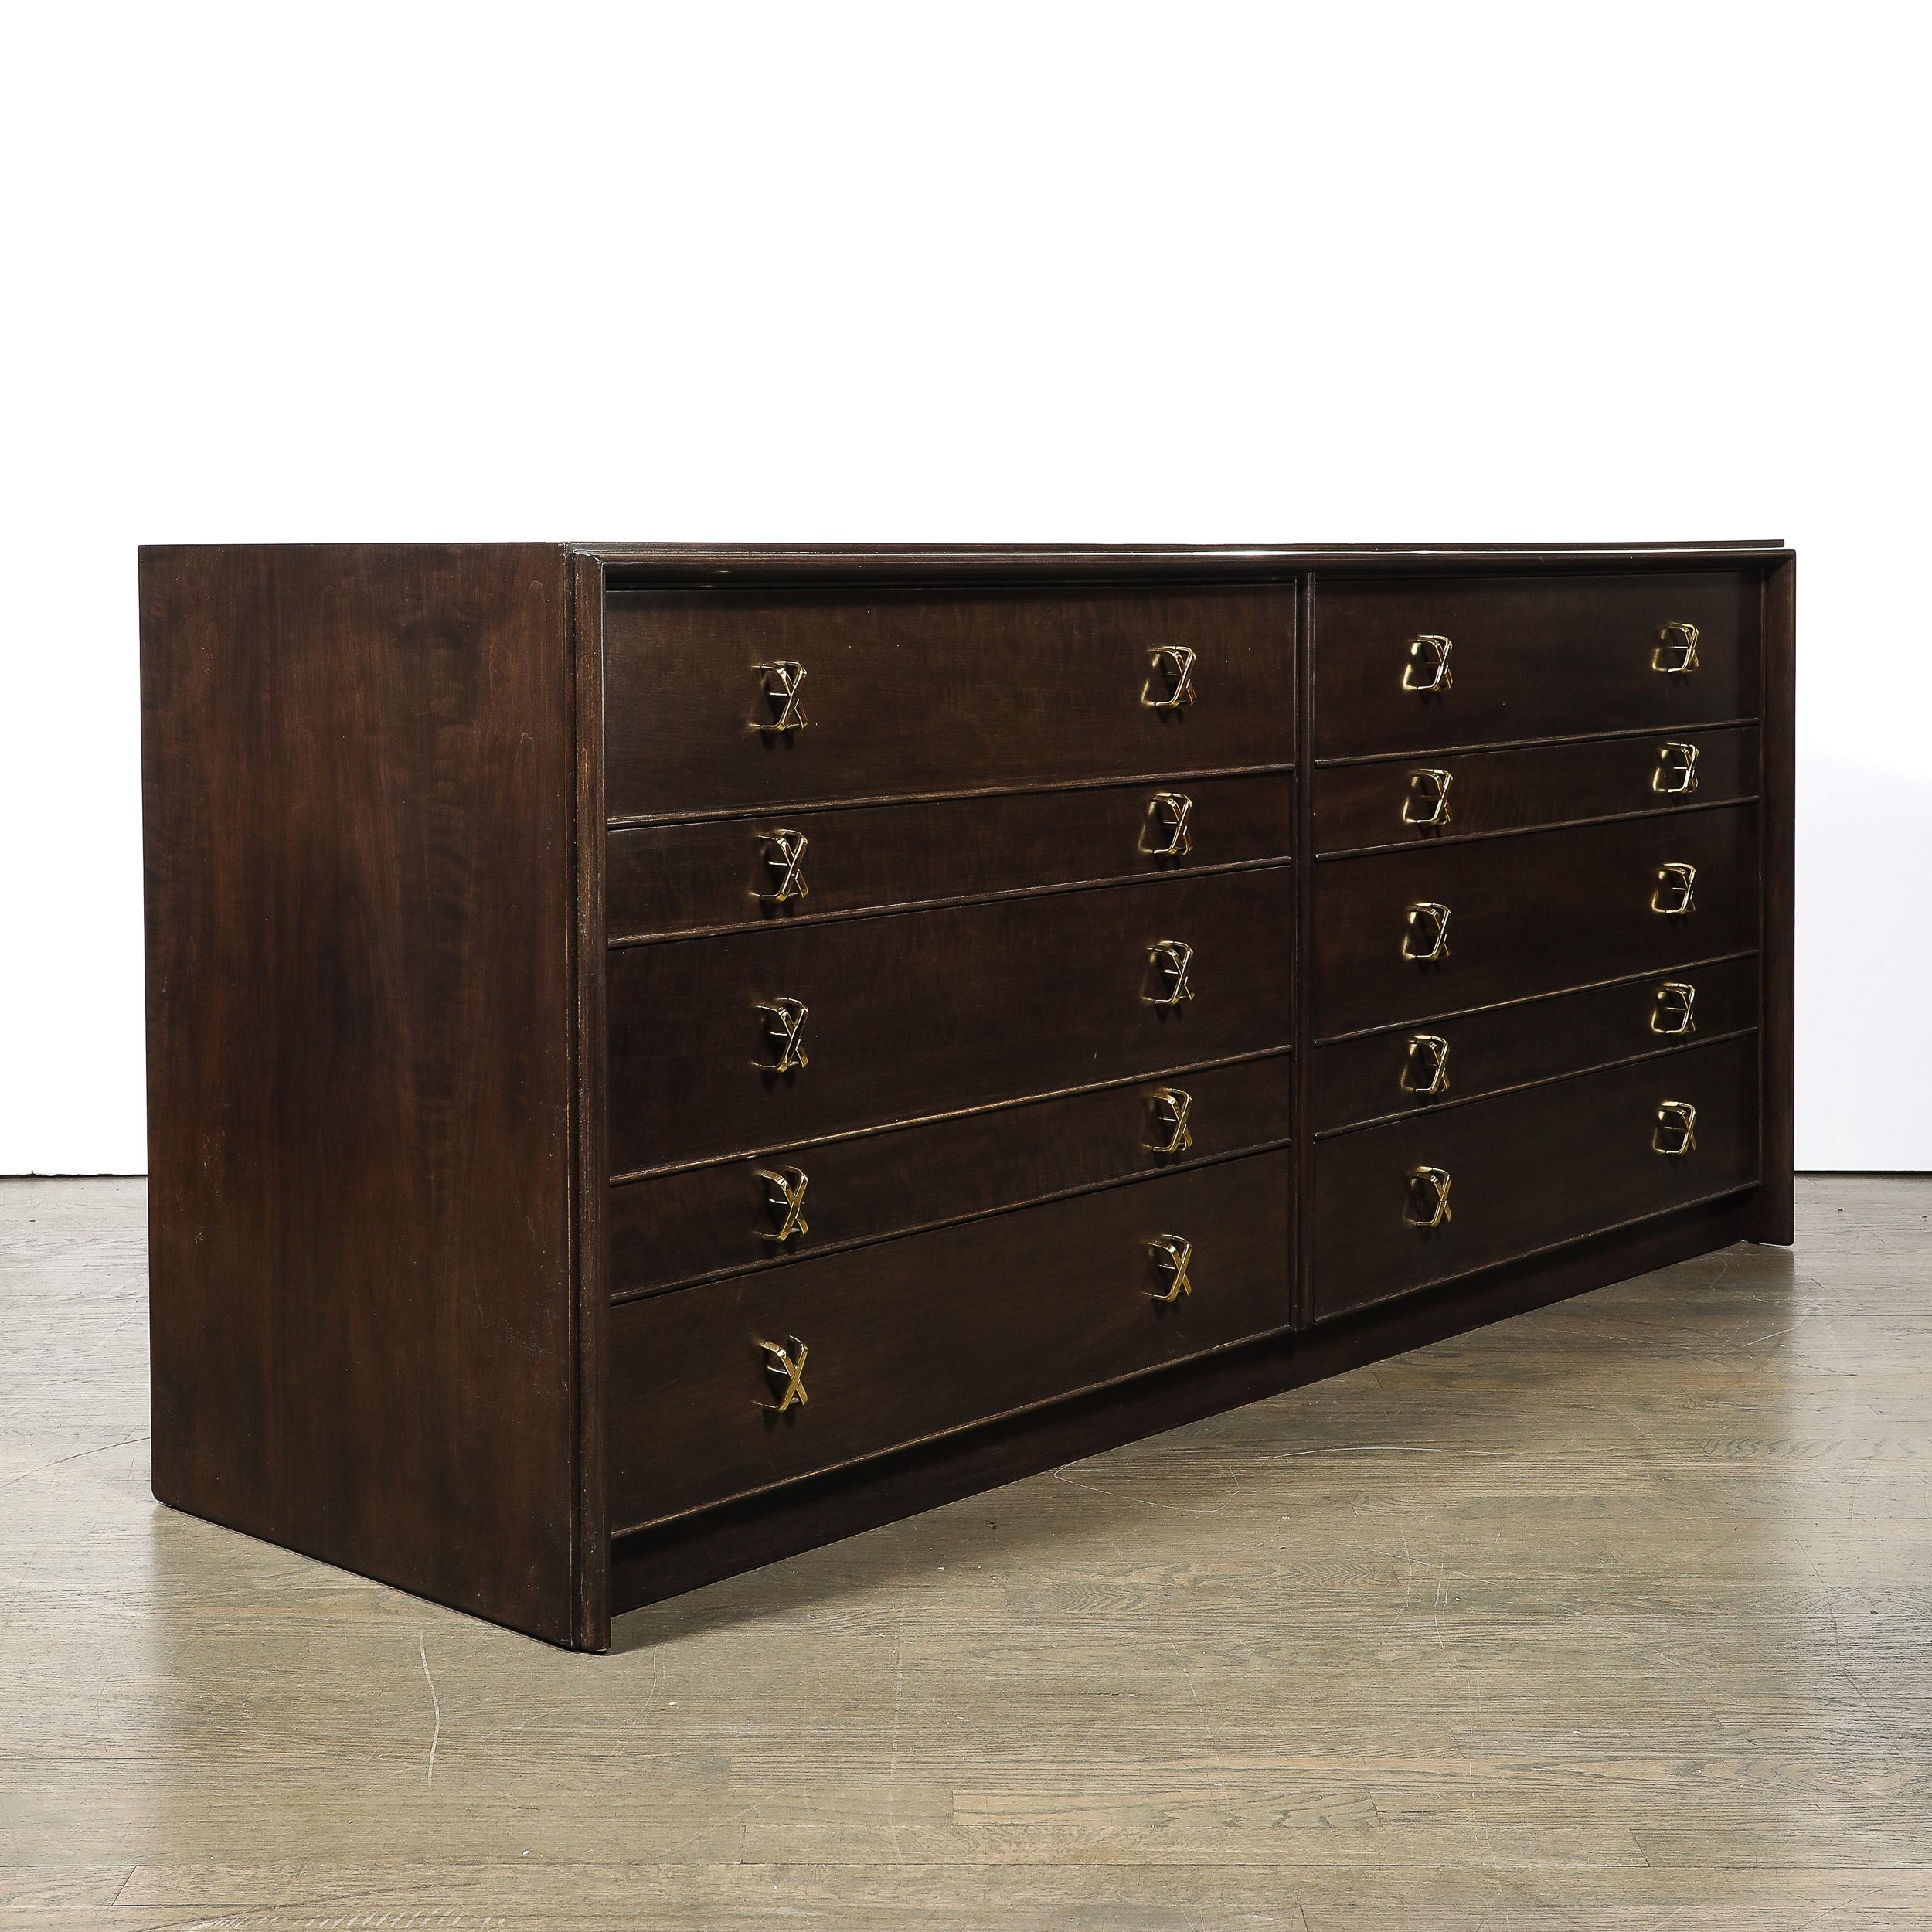 This beautifully fabricated and distinctive Mid-Century Modernist X Form low chest  in rich brown Walnut is by the esteemed designer Paul Frankl and originates from the United States, Circa 1950. Features a lovely rectilinear composition with